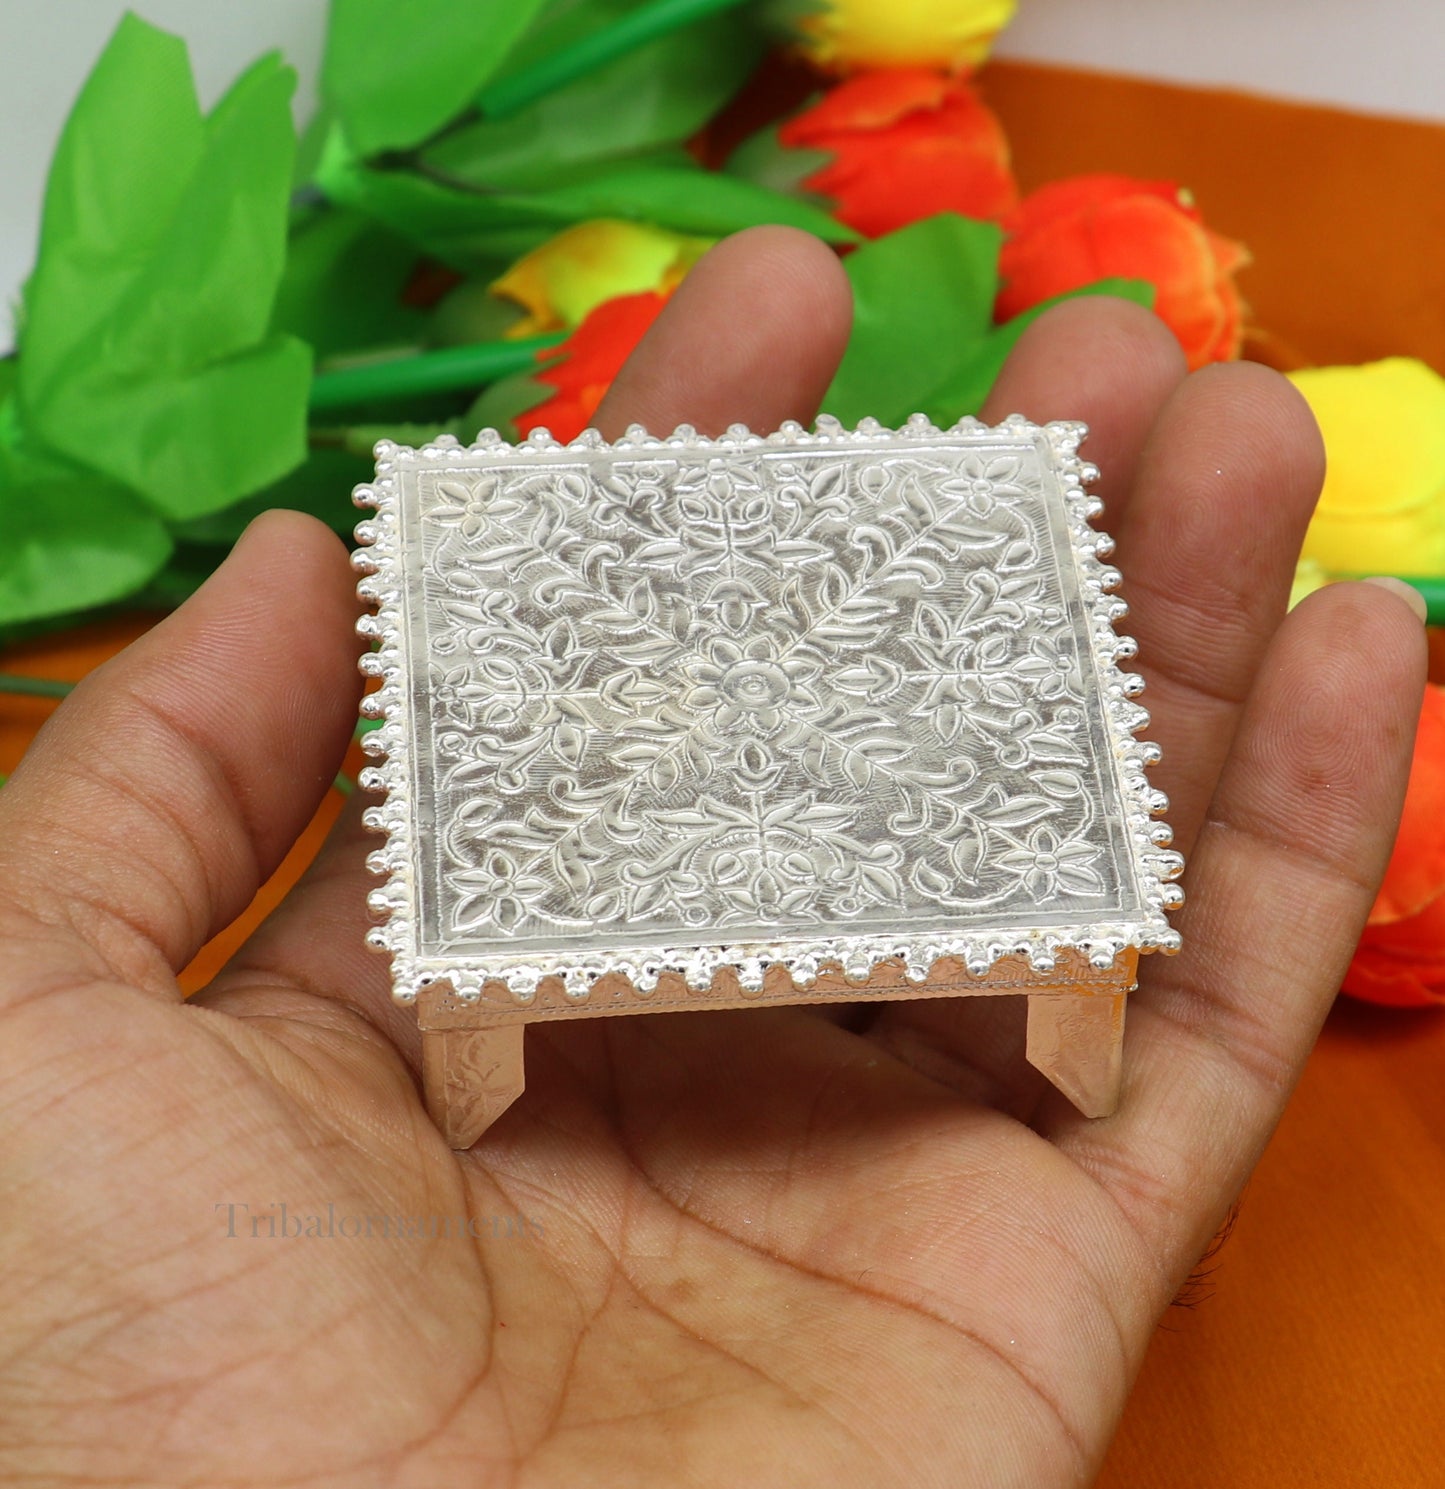 2.5" Vintage design Sterling silver handmade customize small square shape table/bazot/chouki, excellent home puja utensils temple art su553 - TRIBAL ORNAMENTS